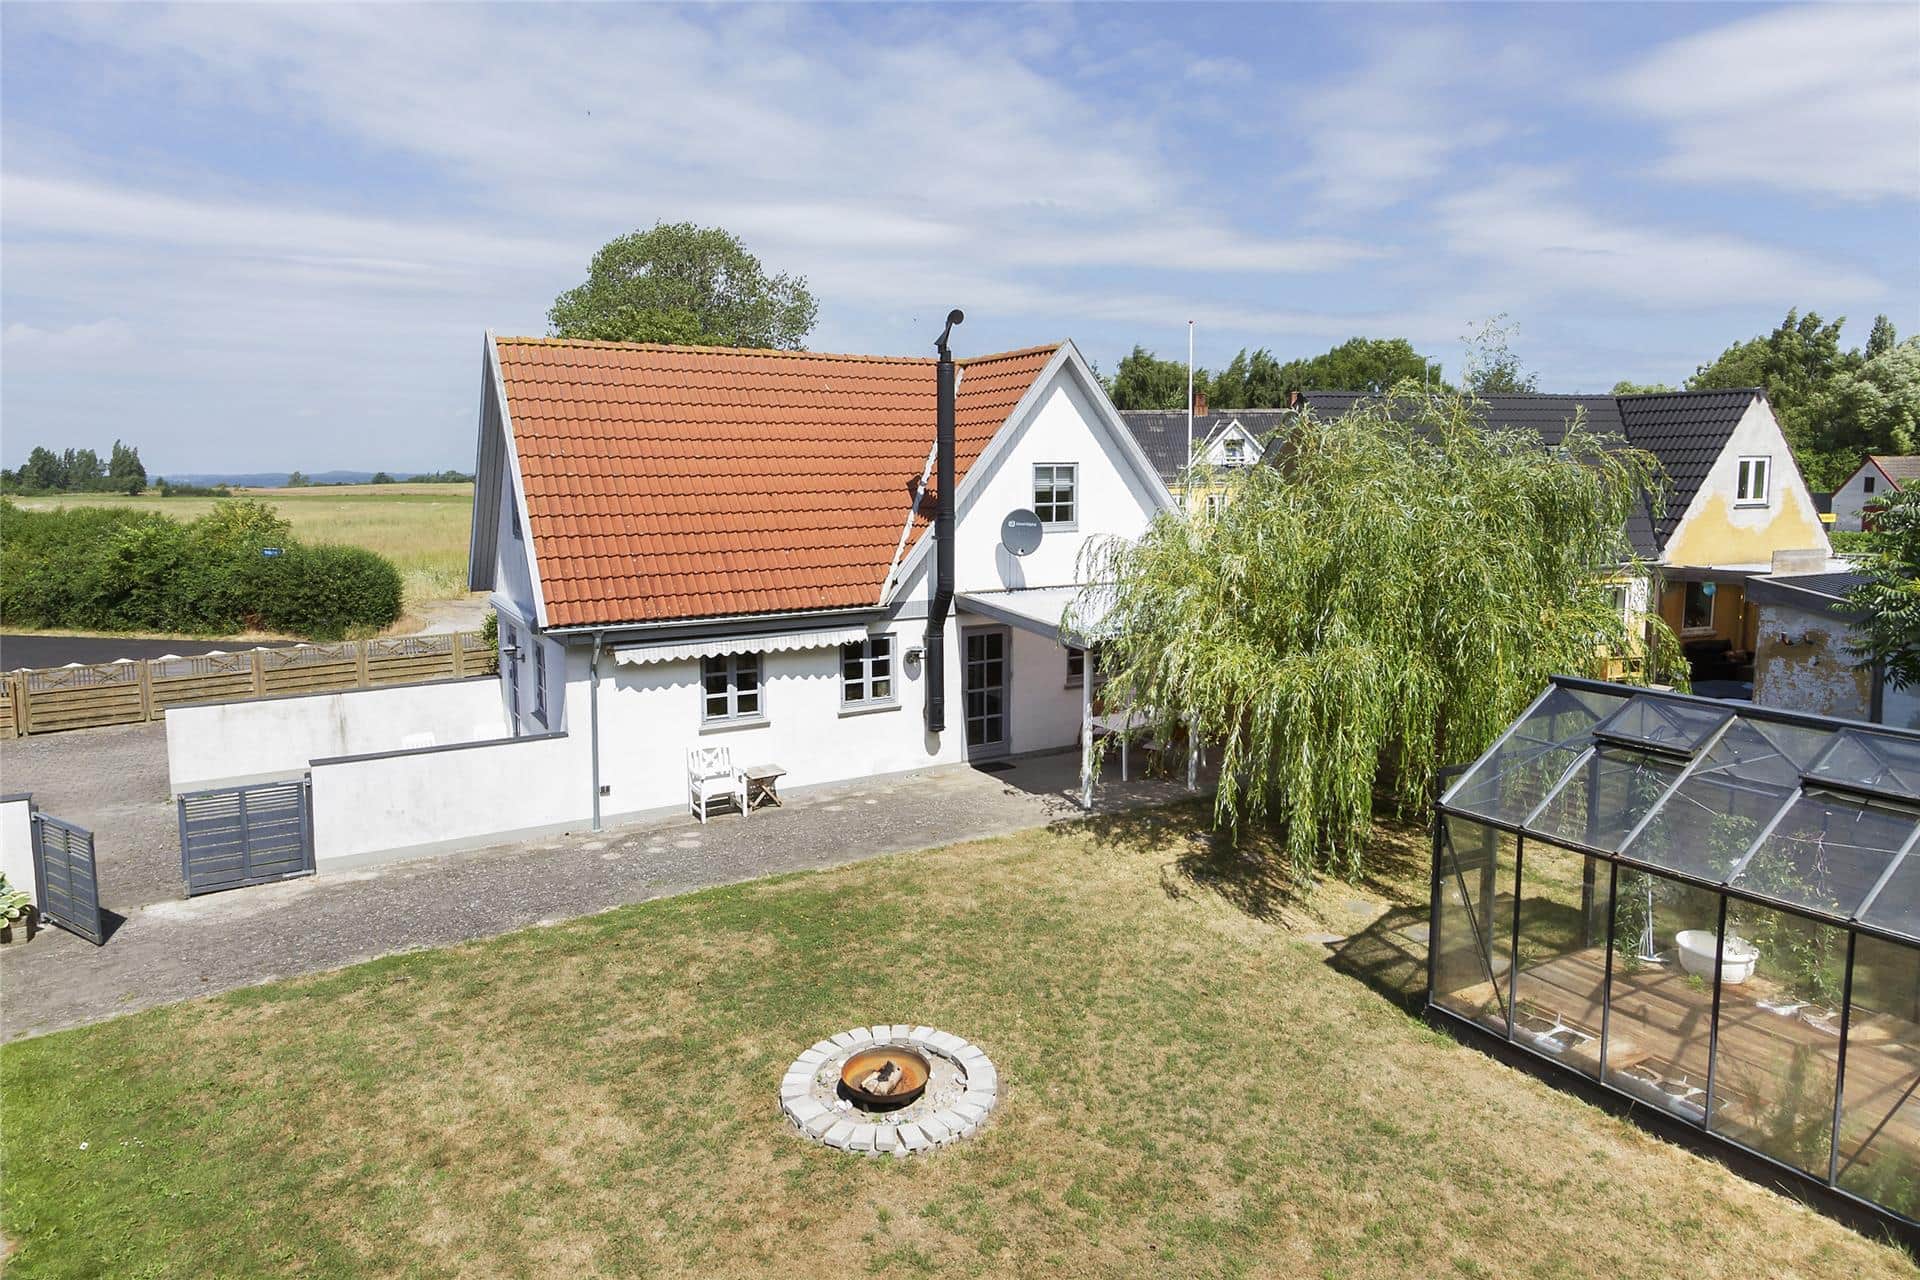 Image 1-15 Holiday-home 6010, Fanefjordgade 71, DK - 4792 Askeby